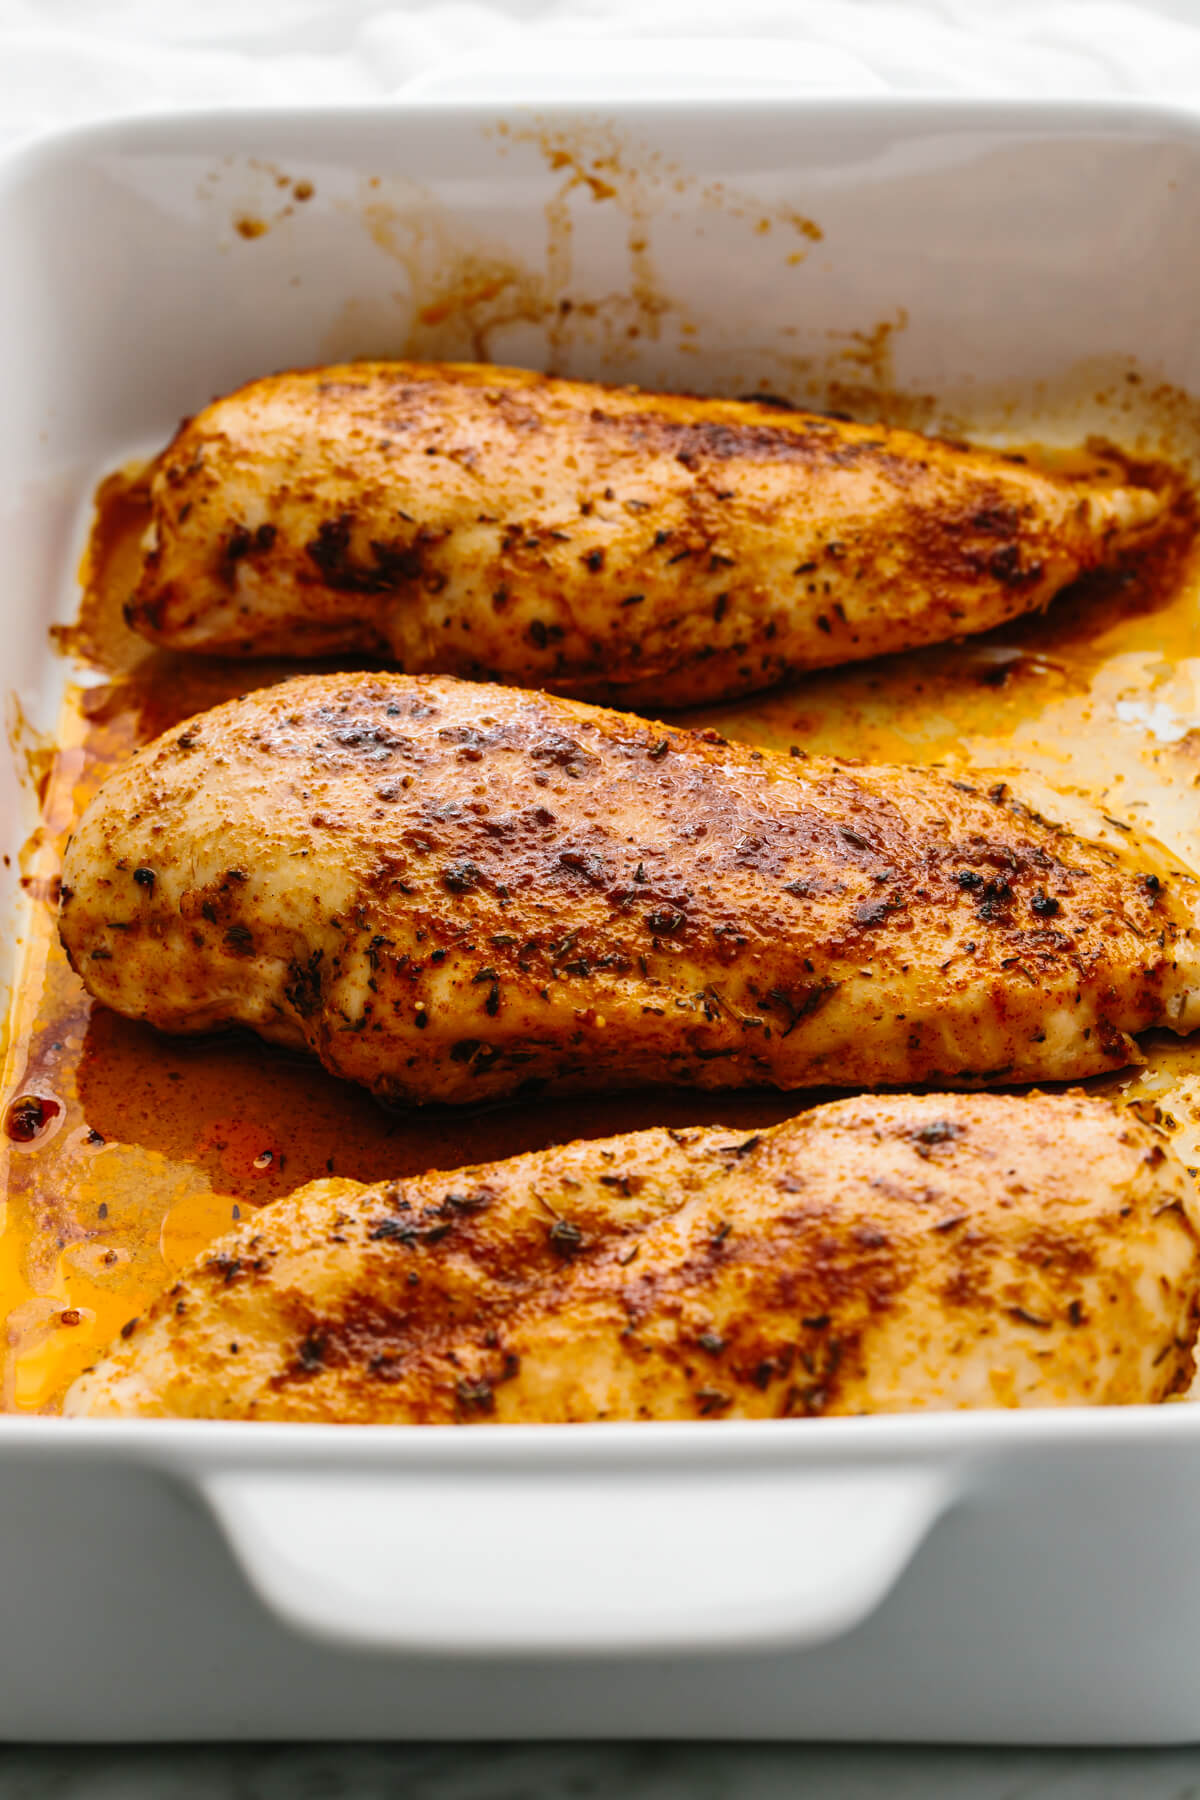 Baked chicken breasts in a pan.